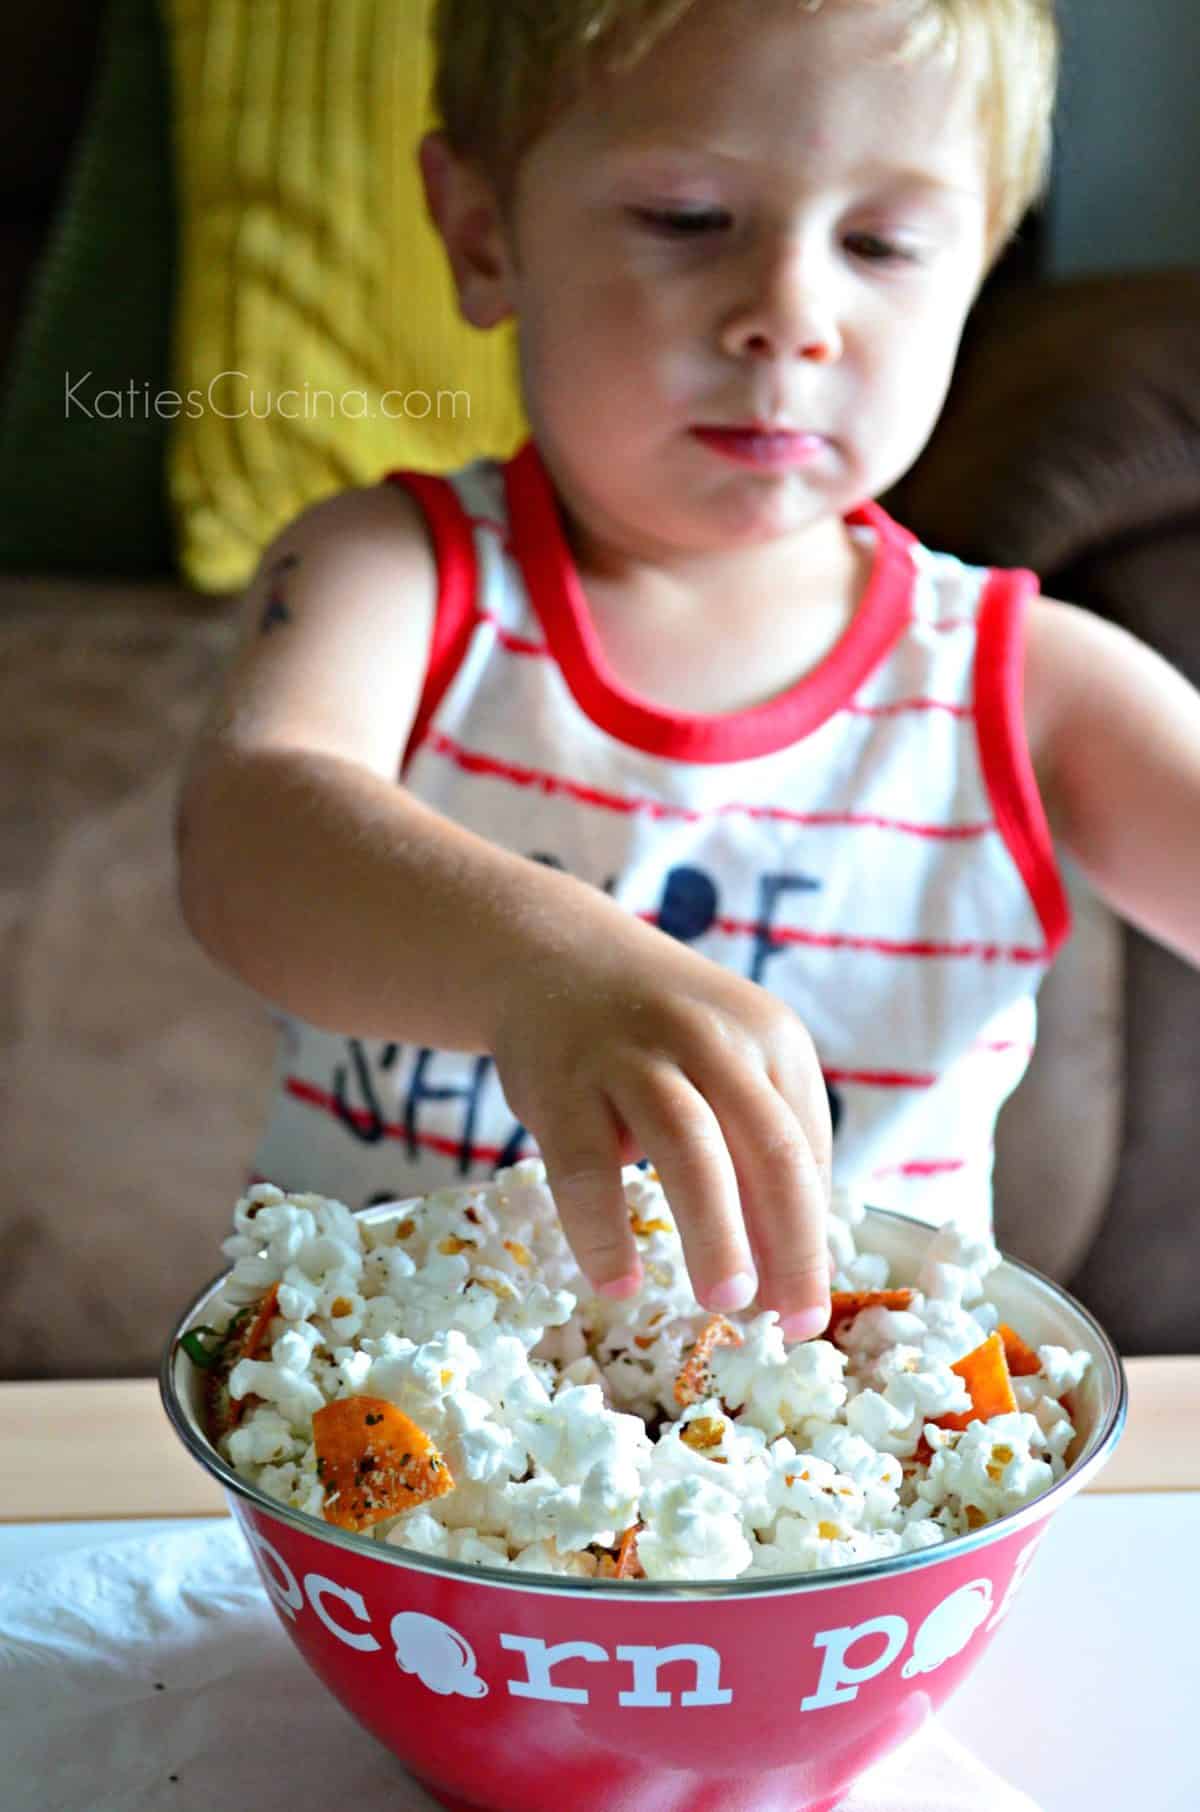 young boy reaching his hand into bowl of pizza popcorn.